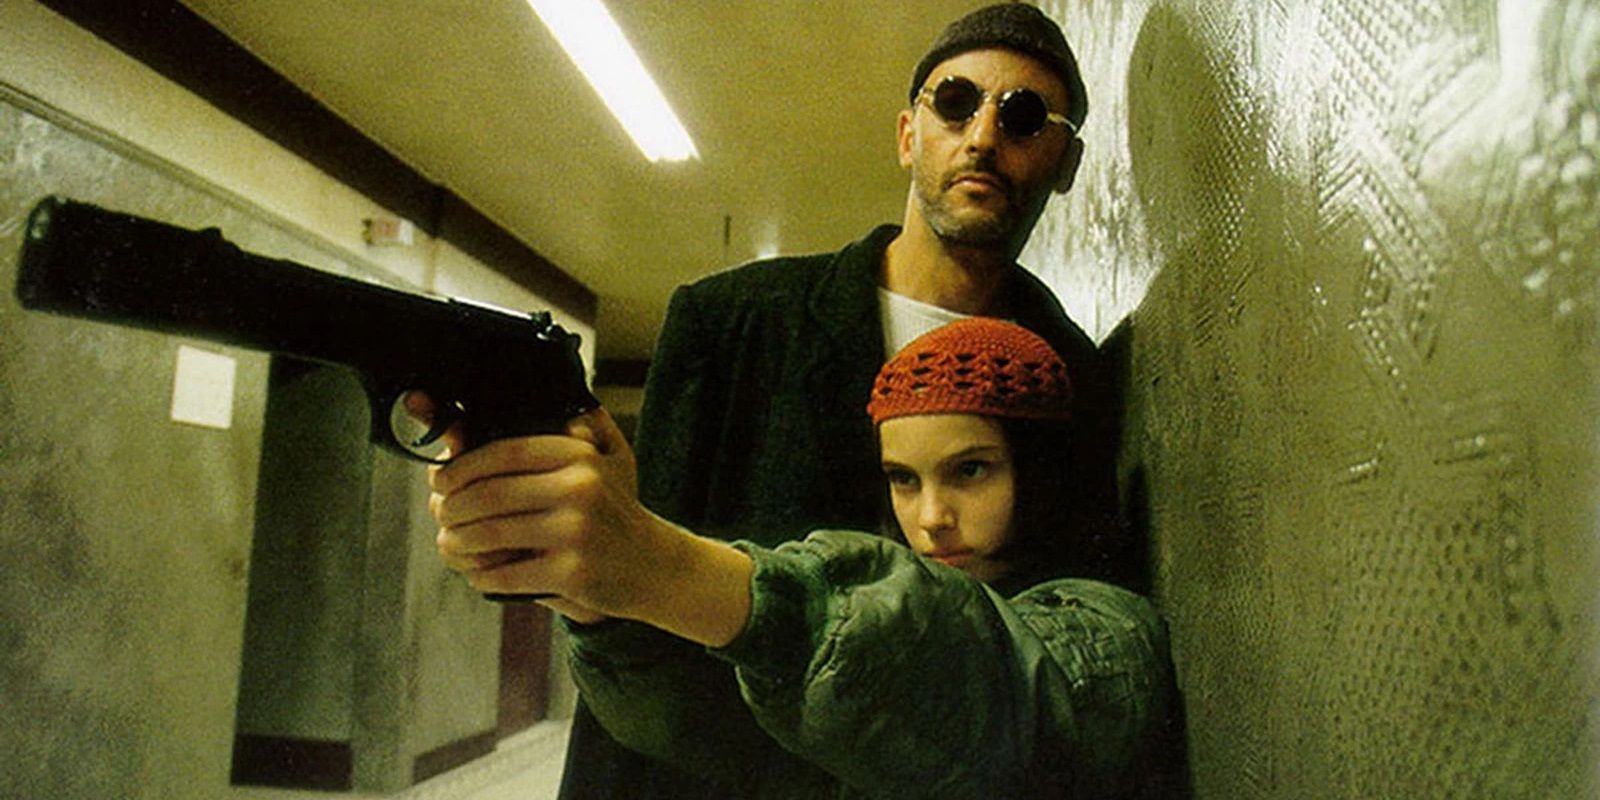 Jean Reno standing behind Natalie Portman pointing a gun in Leon The Professional